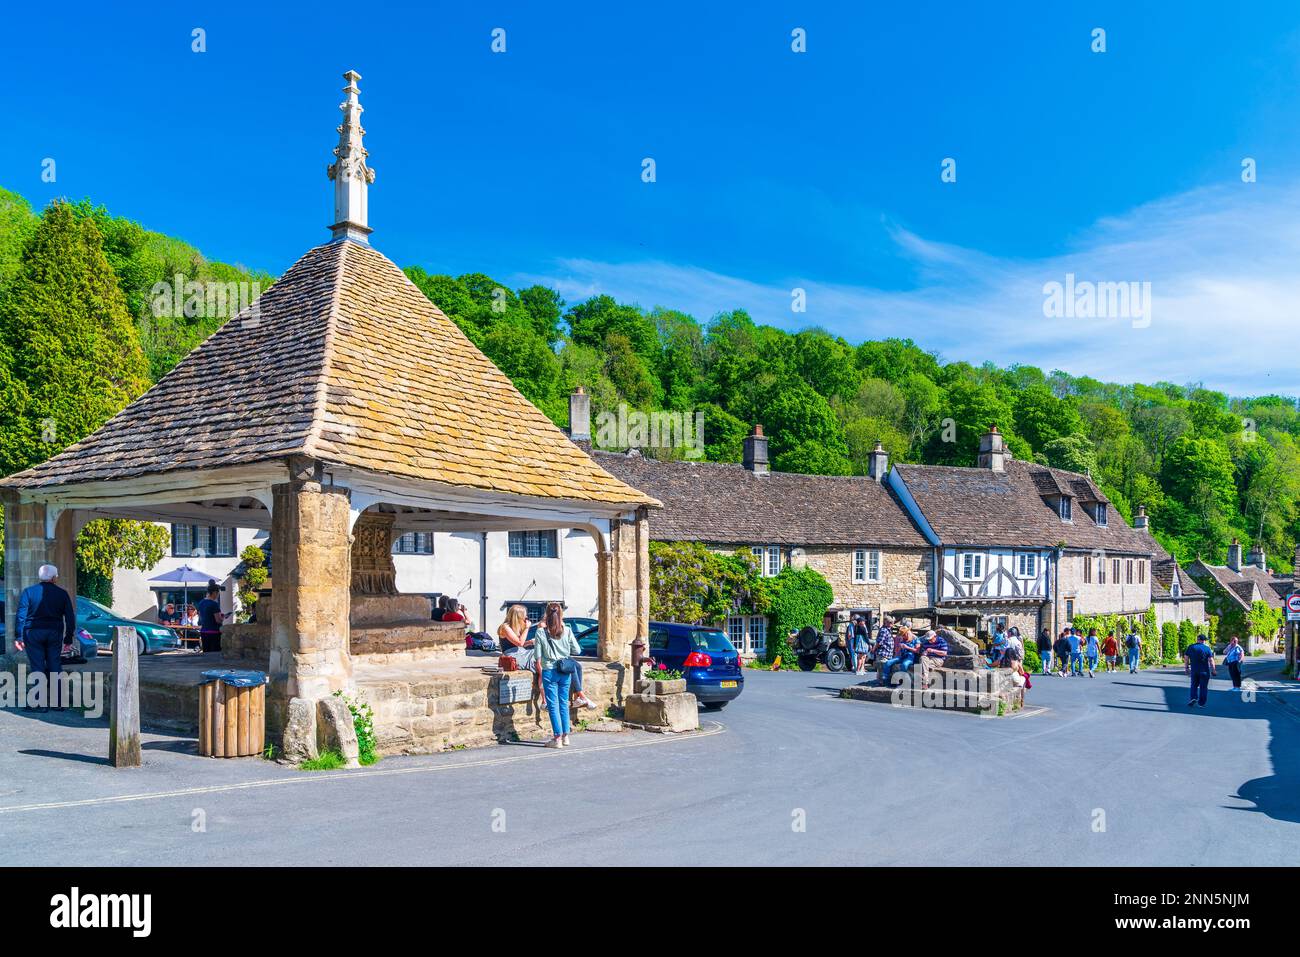 Castle Combe, Cotswolds, Wilttshire, Angleterre, Royaume-Uni, Europe Banque D'Images